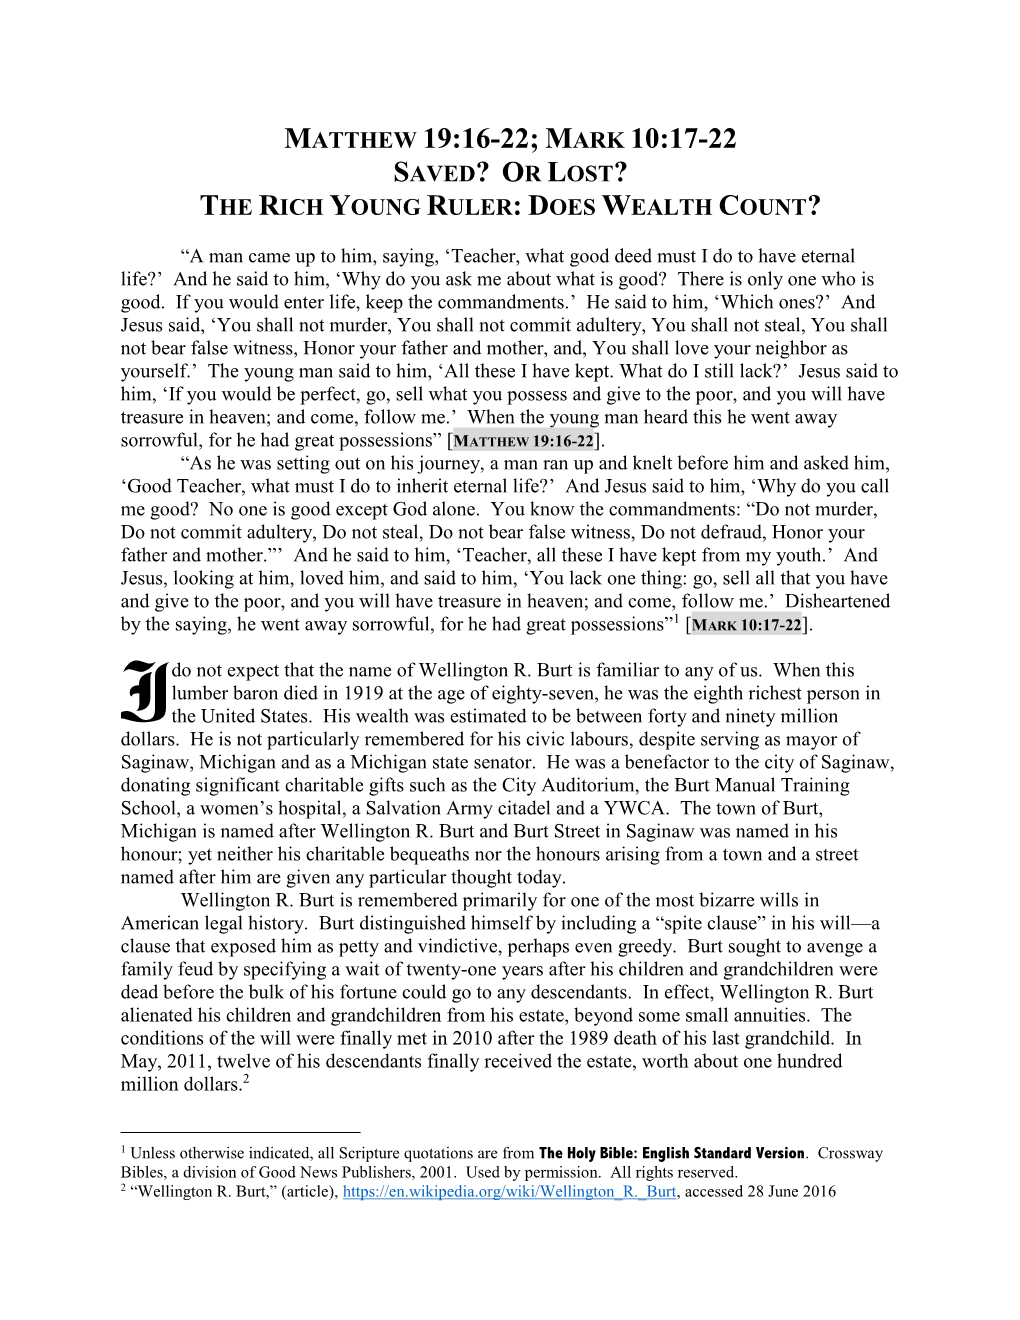 Matthew 19:16-22; Mark 10:17-22 Saved? Or Lost? the Rich Young Ruler: Does Wealth Count?